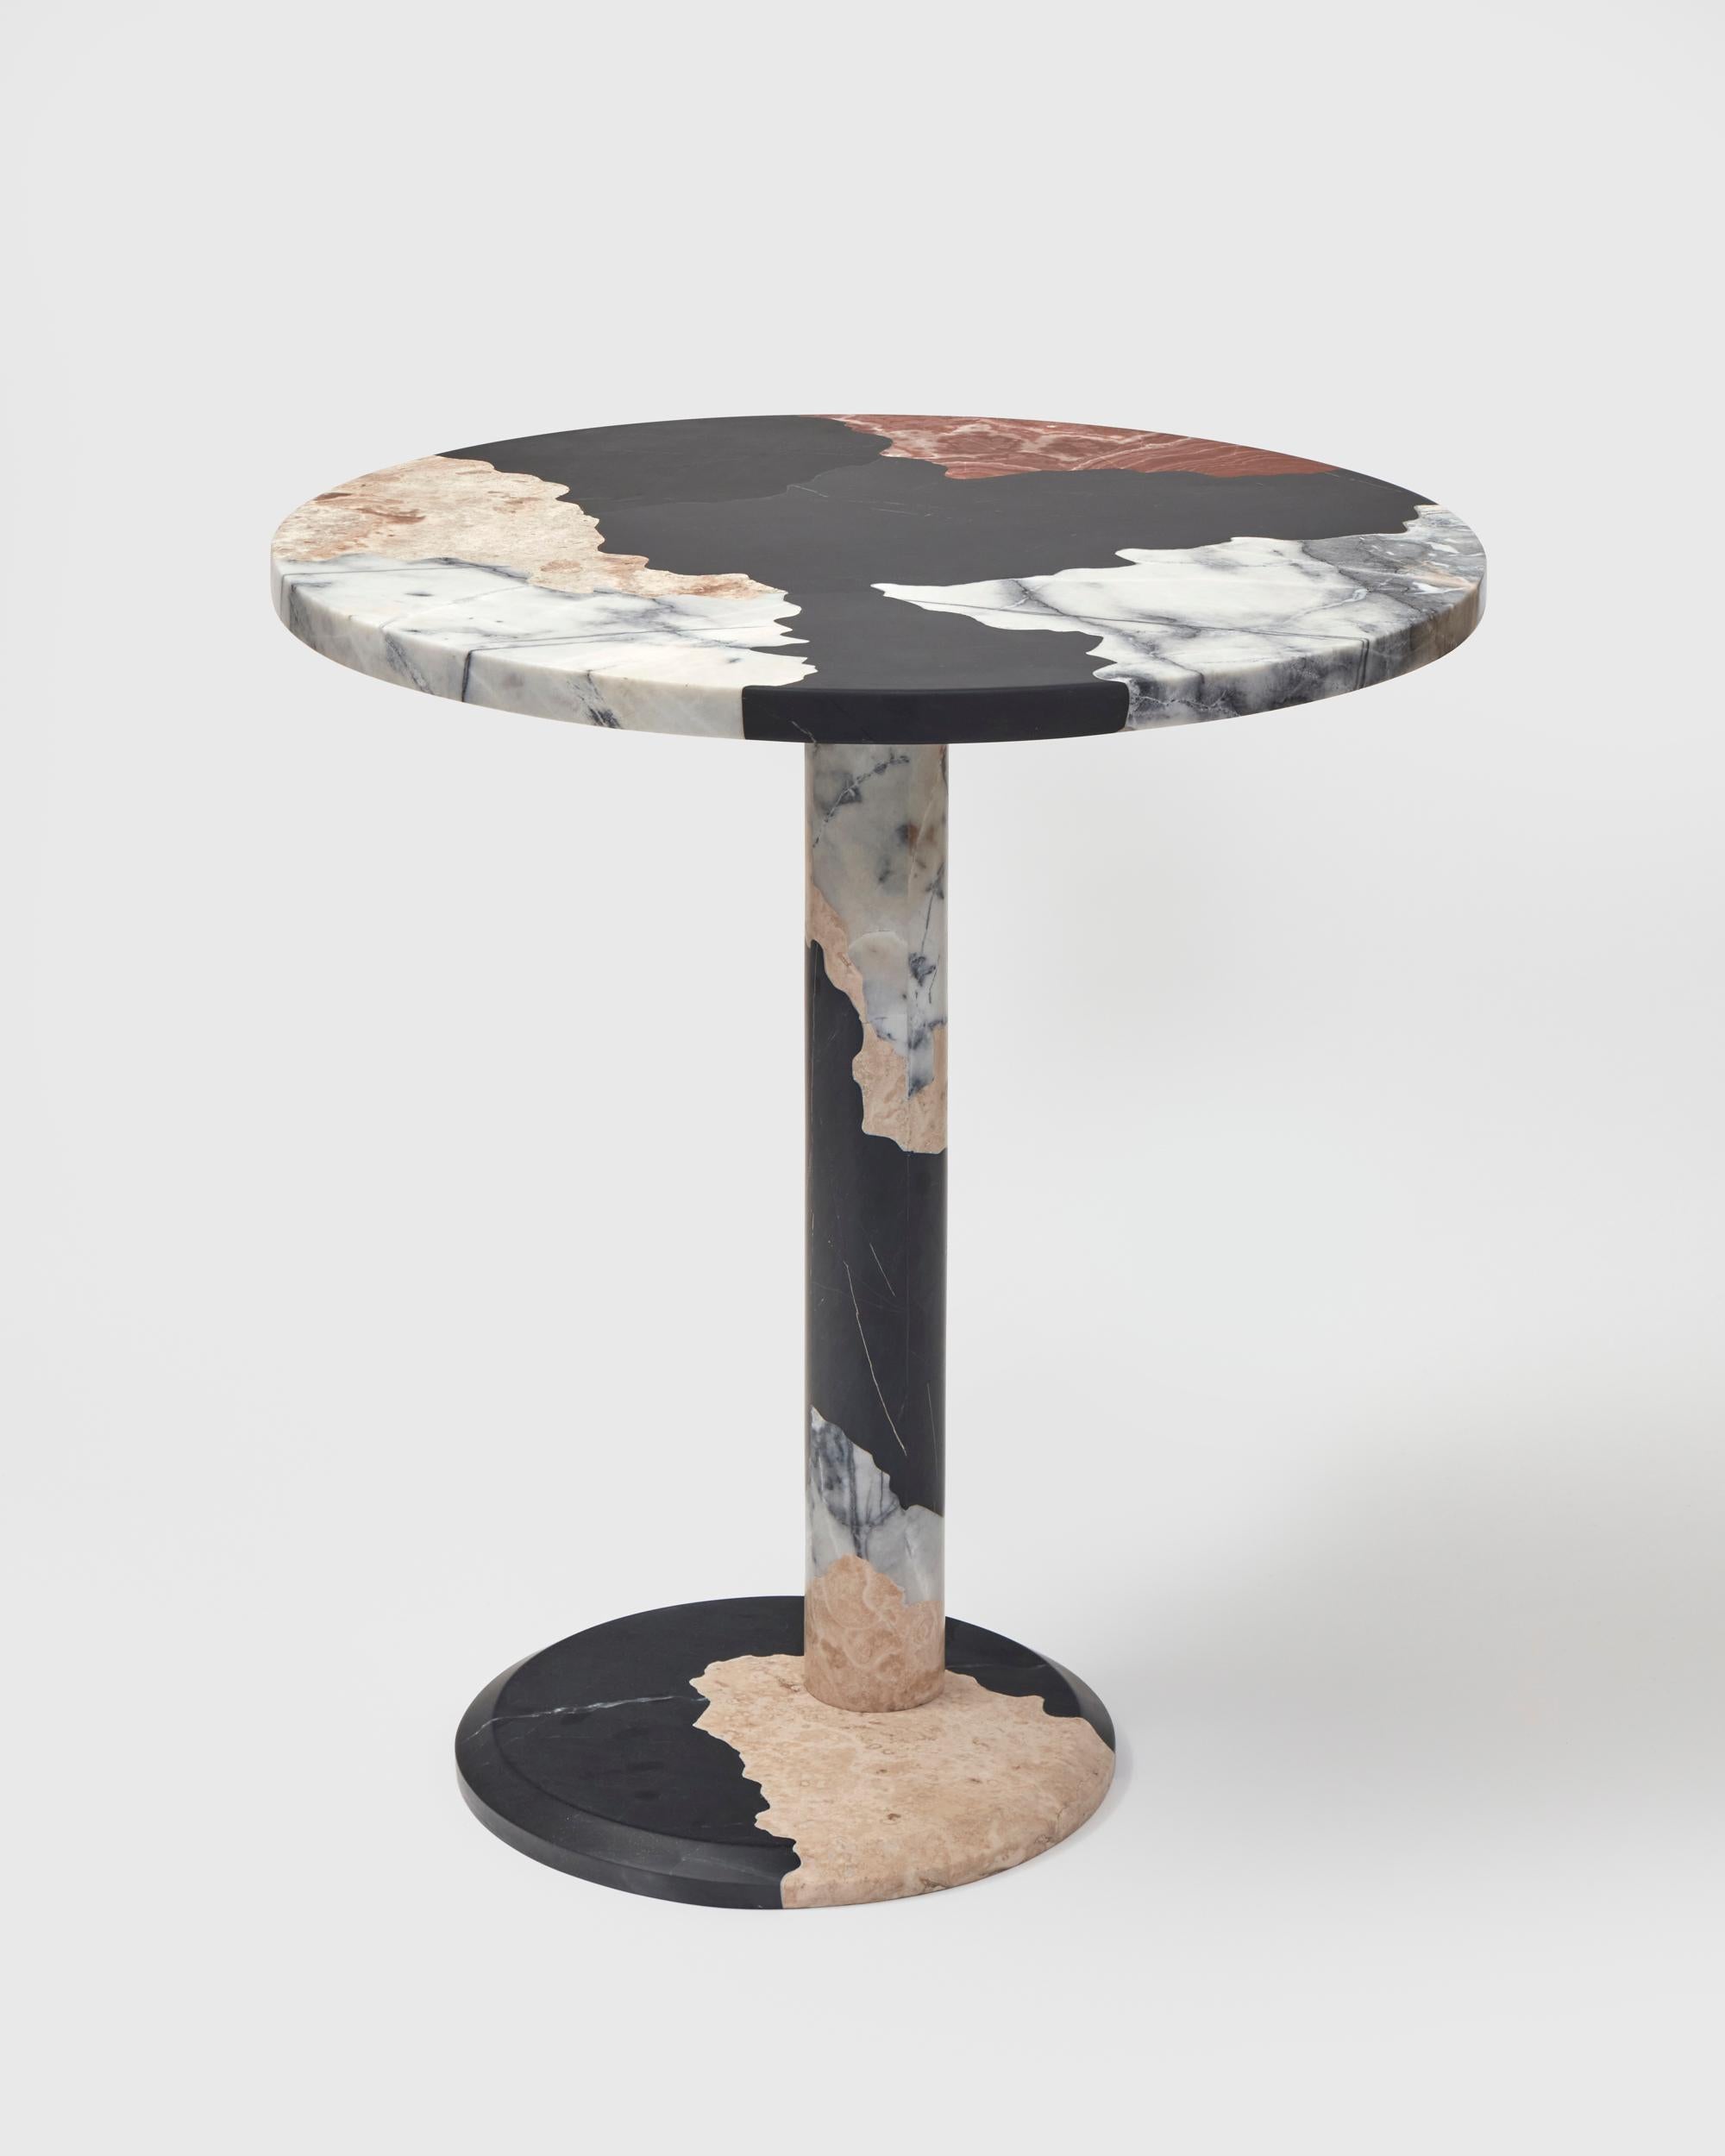 Soil Map N°3 table by Estudio Rafael Freyre
Dimensions: D 65 x H 100 cm 
Materials: Diverse Recycled Andes Stones

The pieces in the Soil Map series are part of a quest to bring our bodies closer to the geography we inhabit, to the mineral